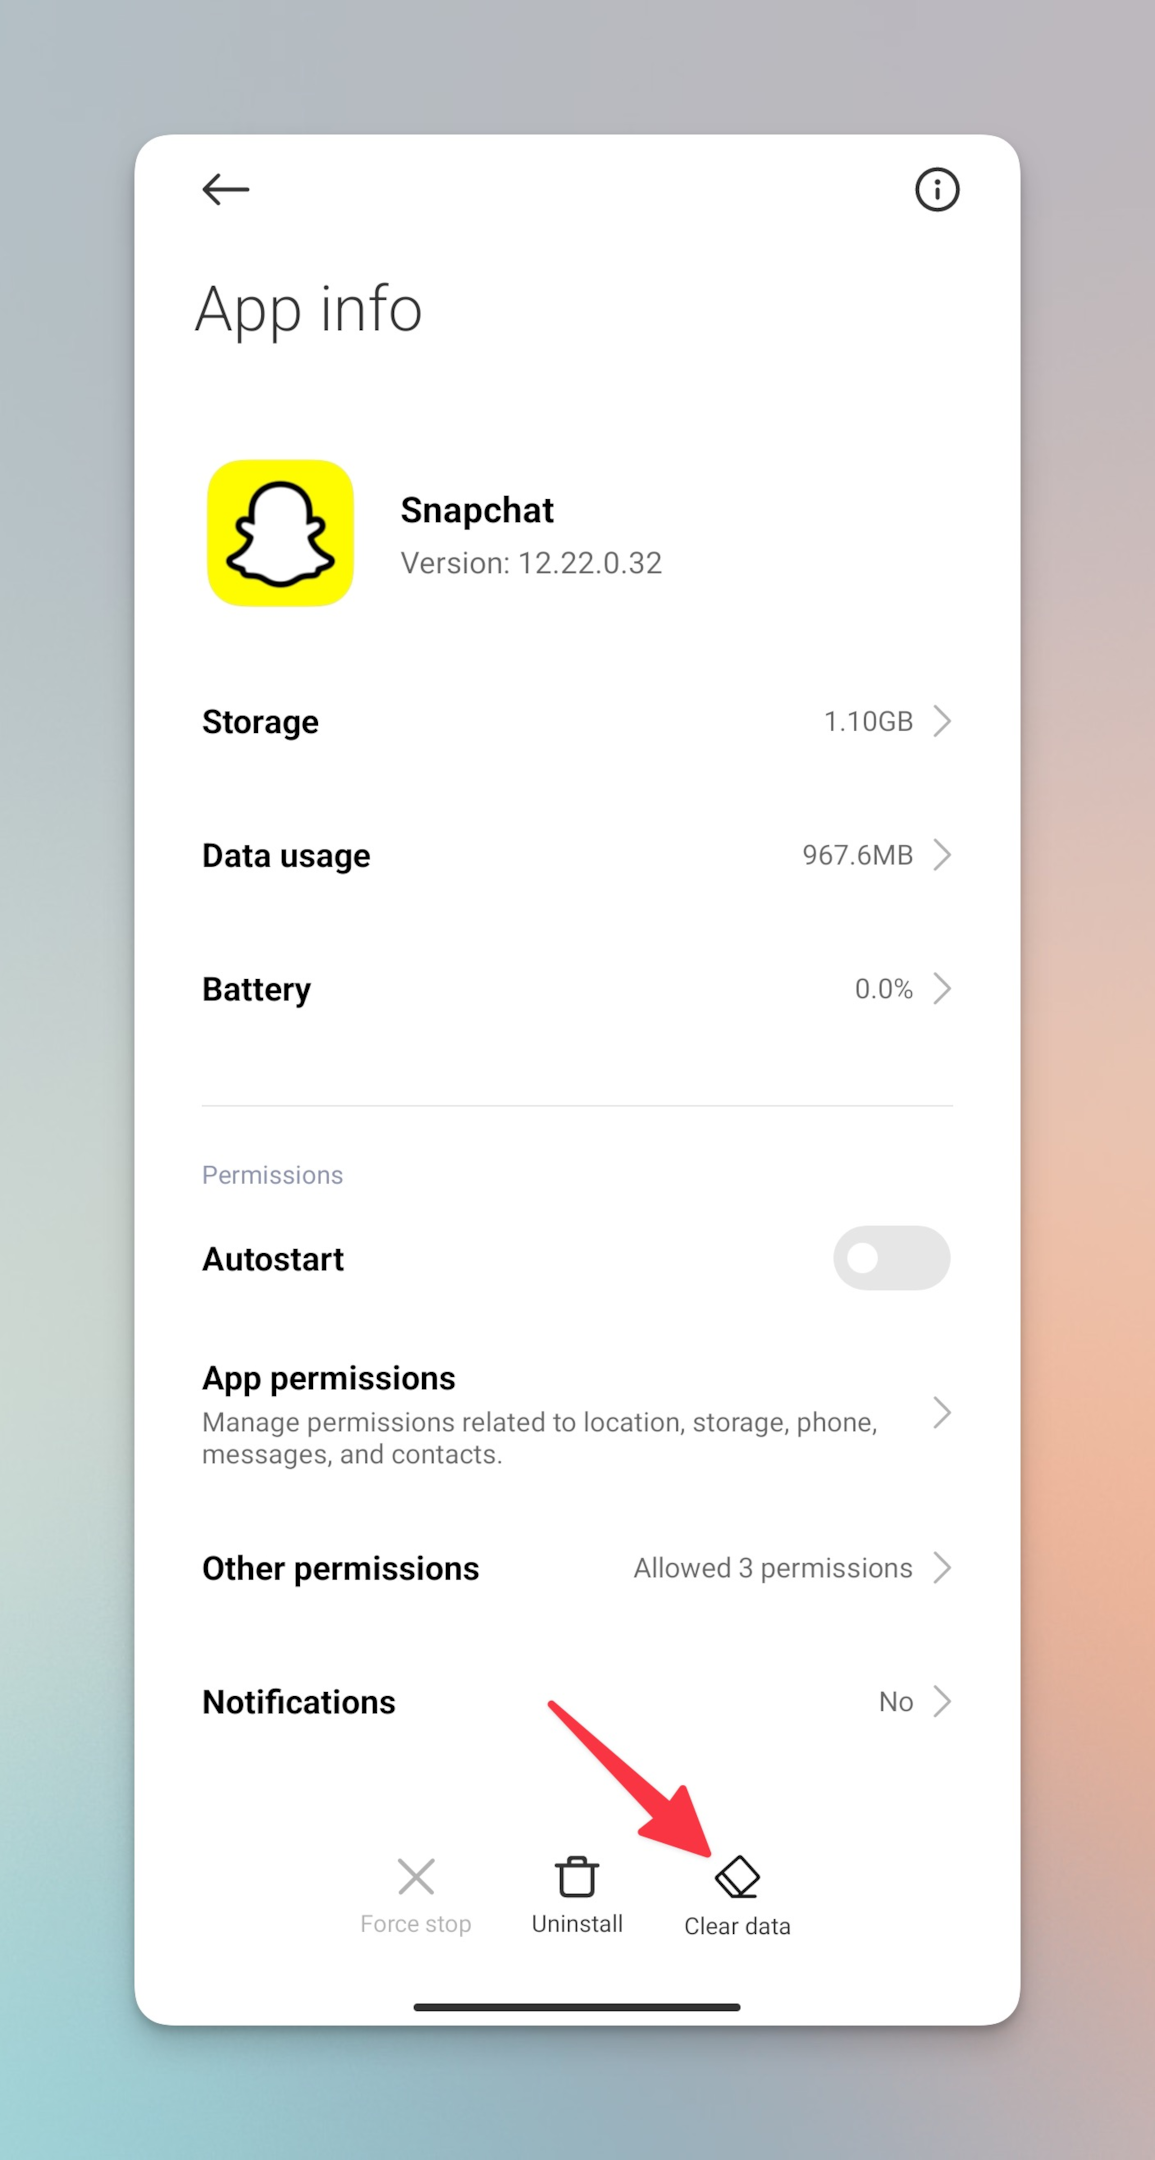 Remote.tools shows how to clear cache of Snapchat app for Android.